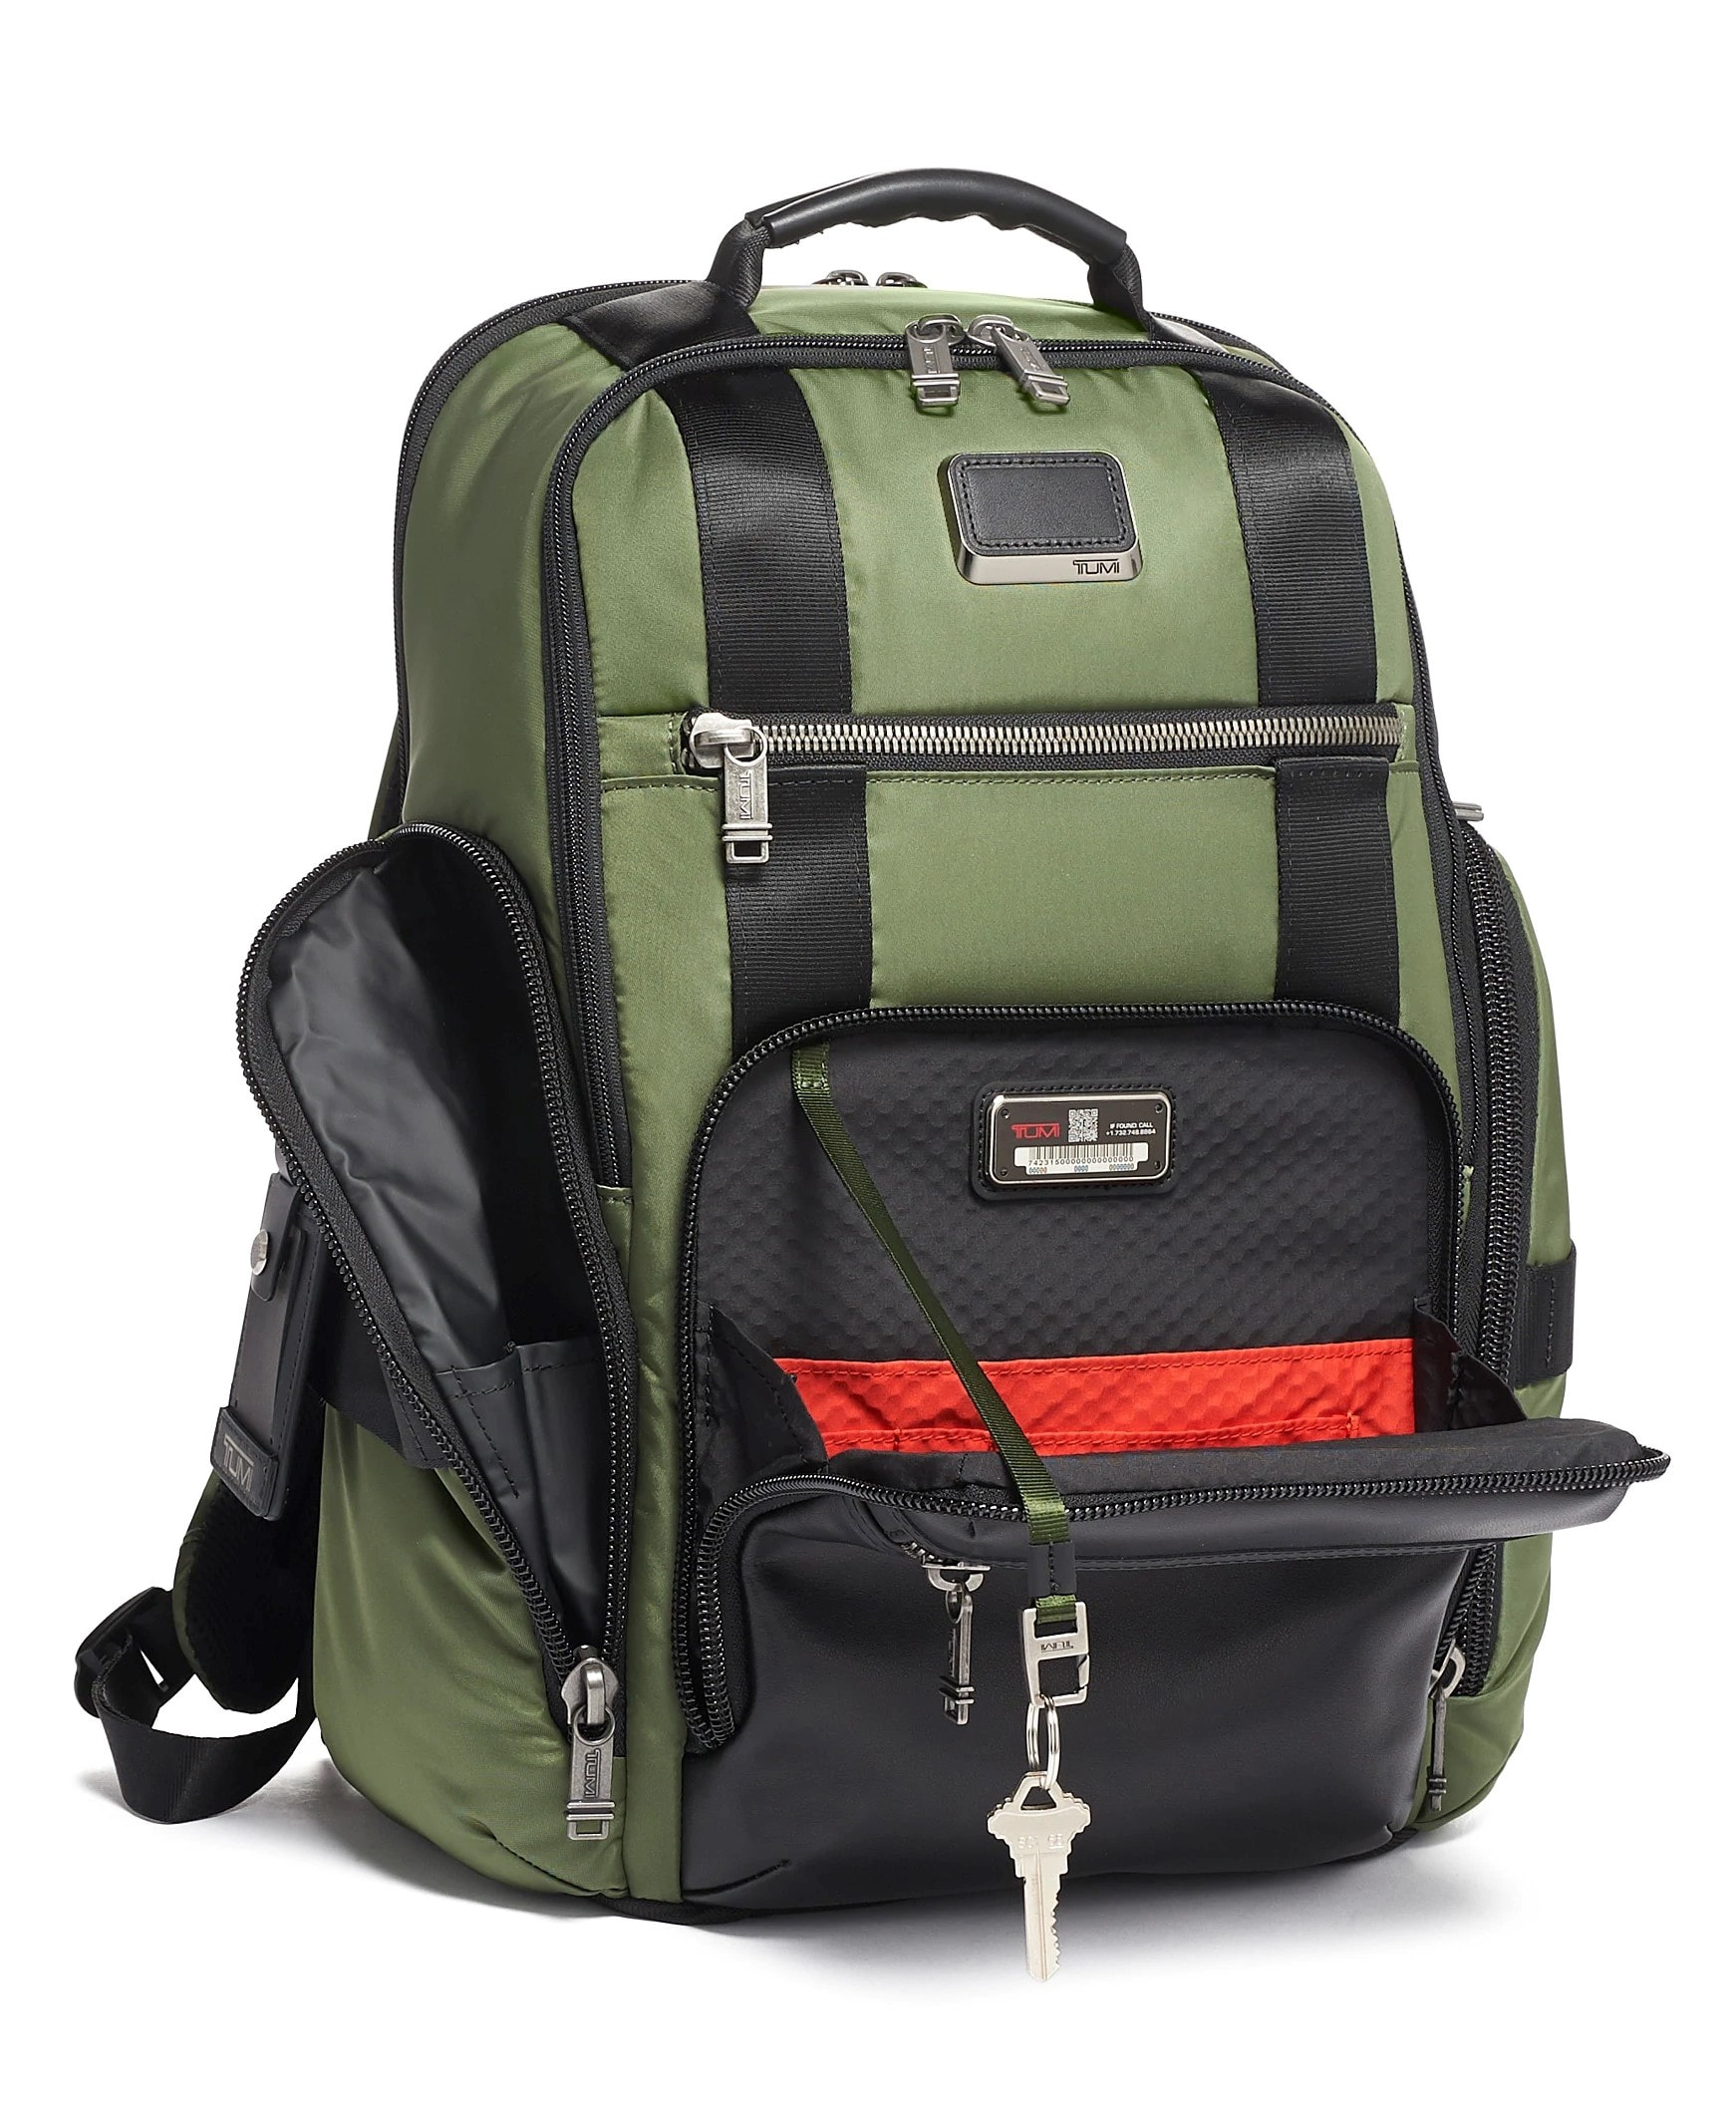 BALO NAM TUMI SHEPPARD DELUXE BRIEF PACK ALPHA BRAVO BACKPACK NEW 18